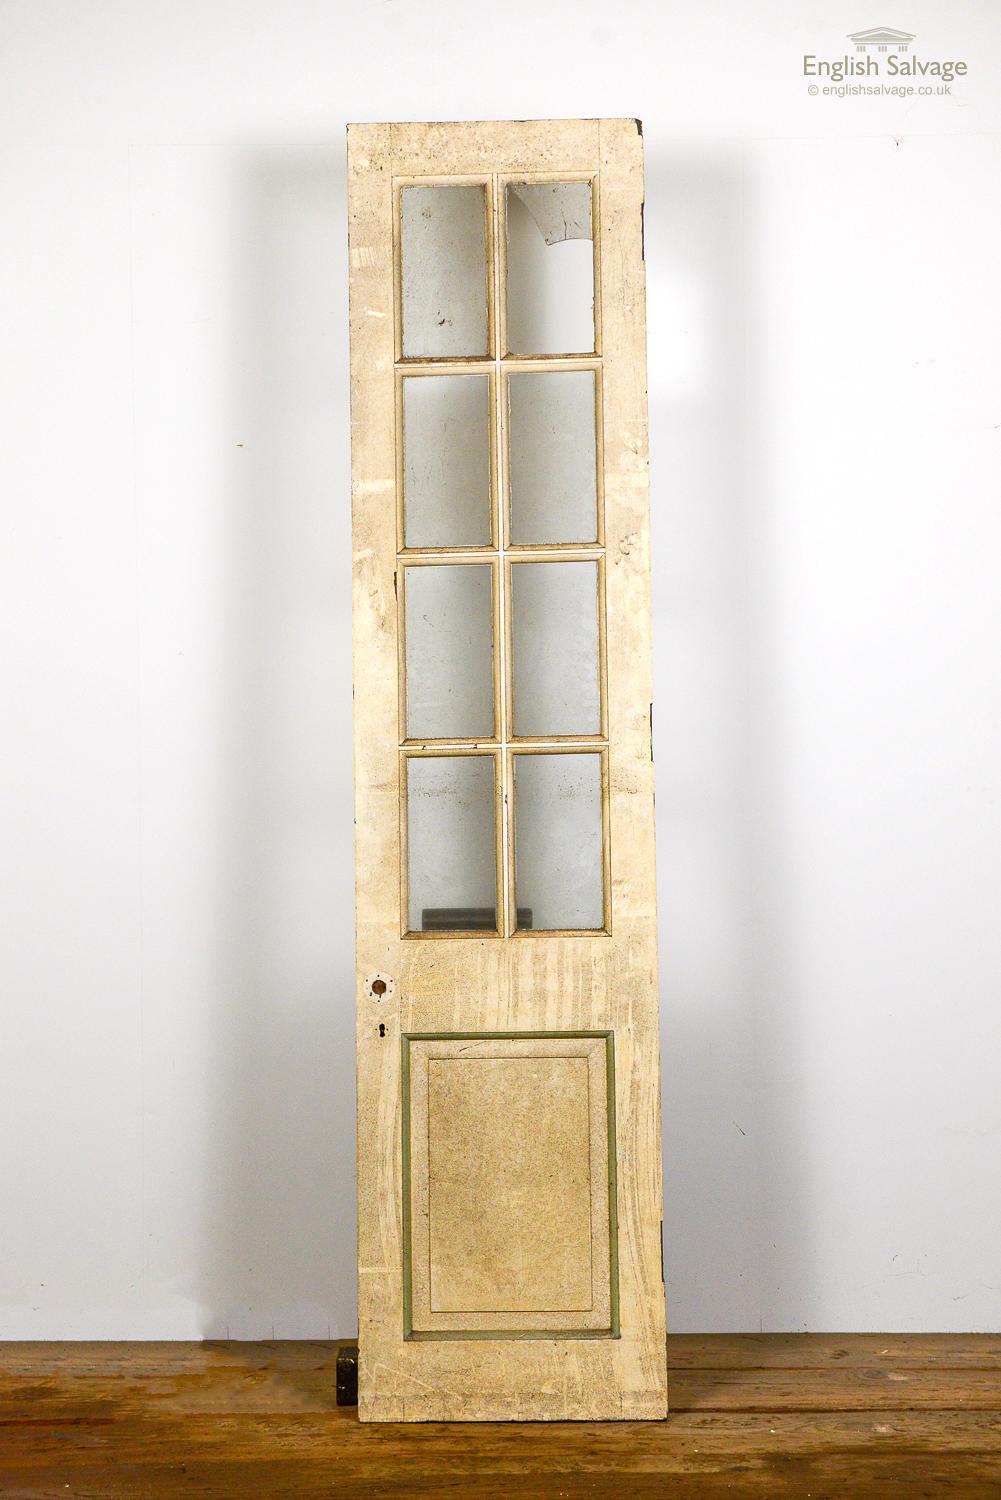 Salvaged sturdy single panel glazed door. Painted hardwood with eight glazed panels over one beaded and fielded panel. One pane is broken. Scuff marks and chips to the paint.